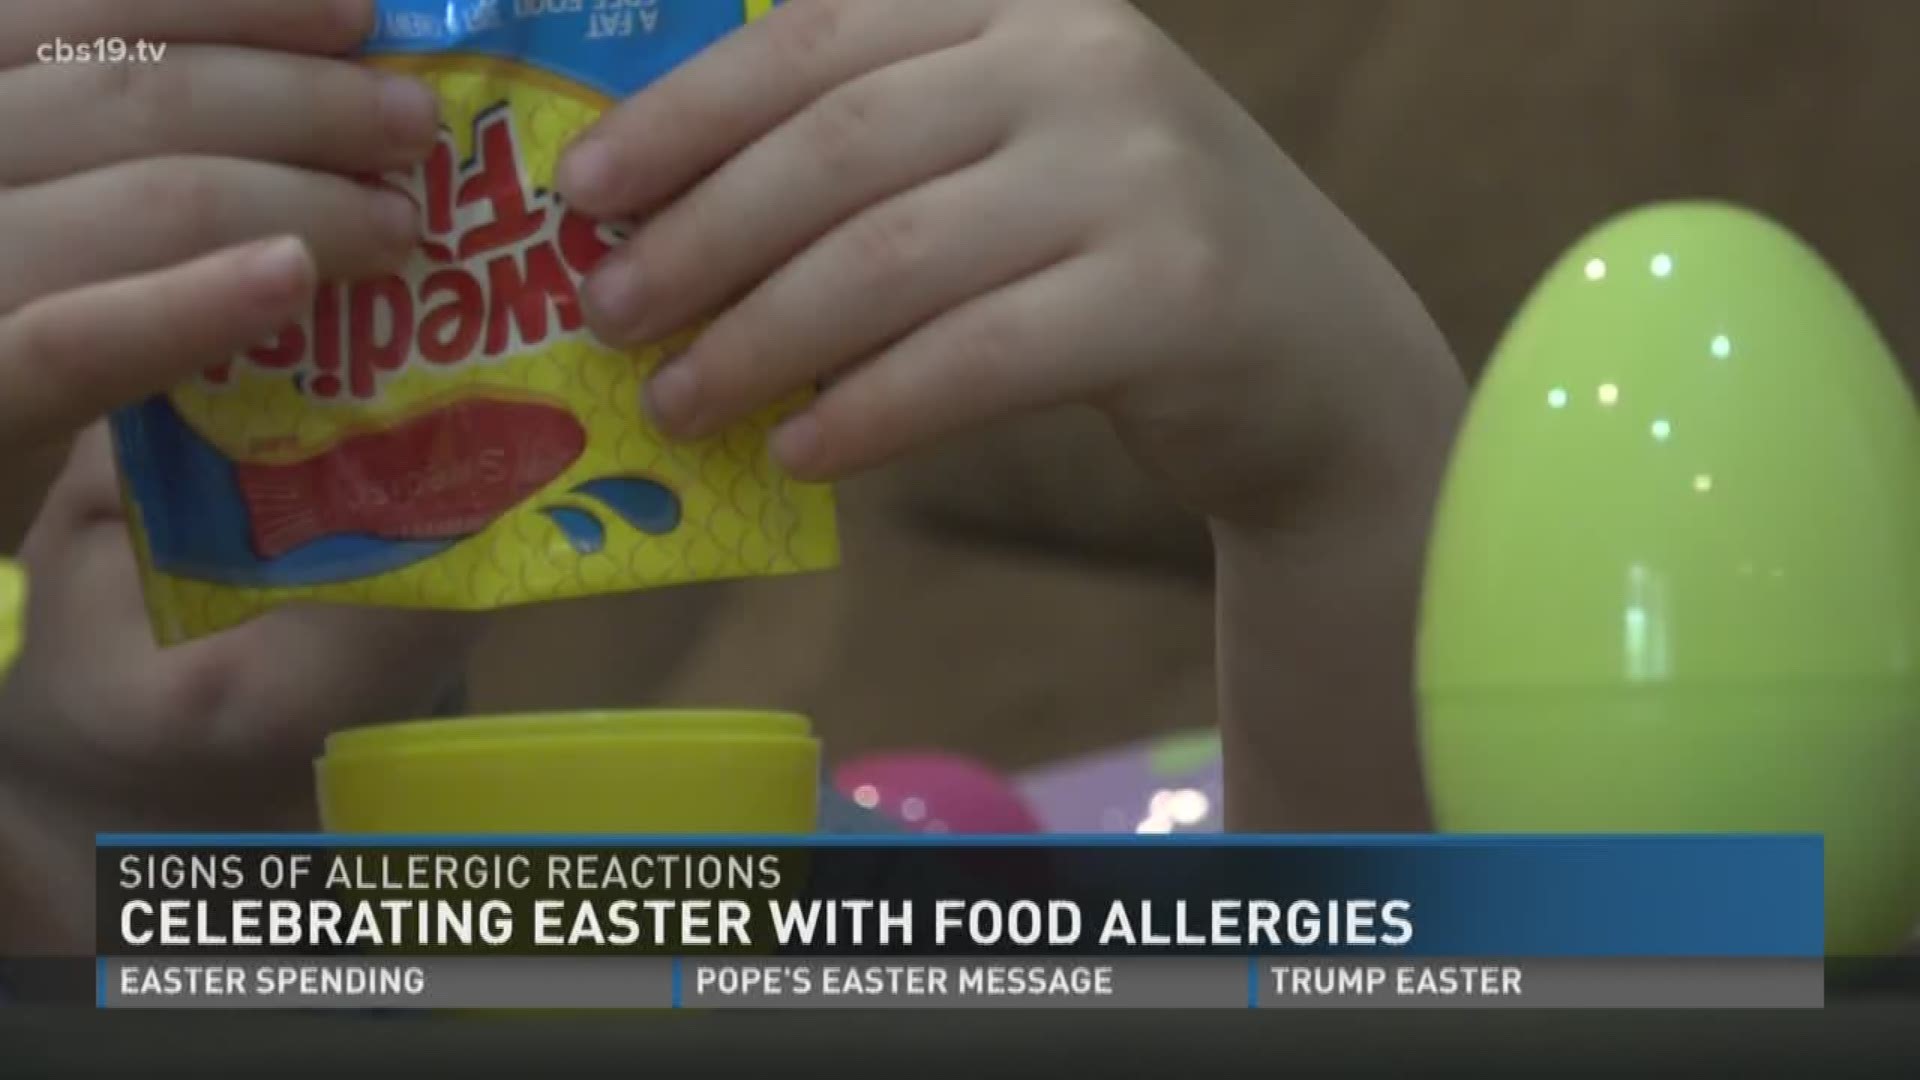 Do you know what's in your child's Easter basket? One doctor shares tips in case you child has any food allergies.